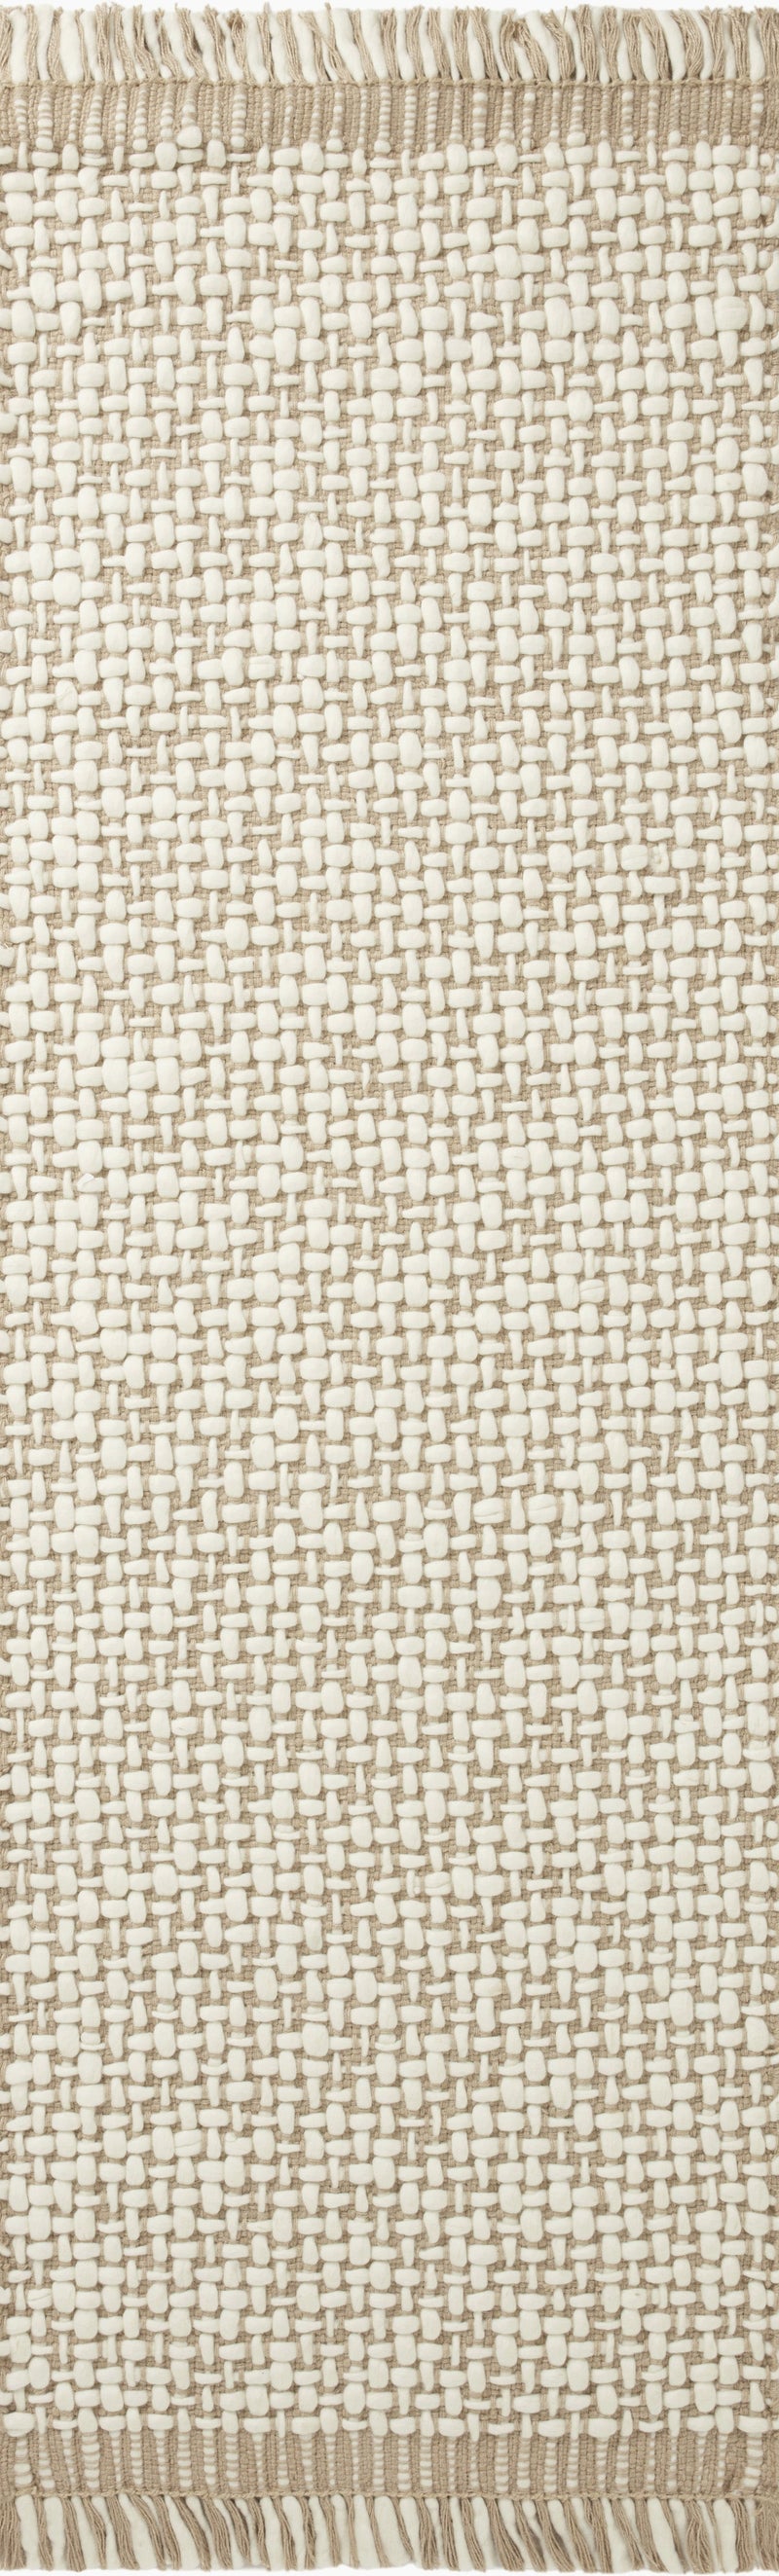 media image for Yellowstone Hand Woven Natural Ivory Rug By Amber Lewis X Loloi Yeloyel 01Naivb6F0 2 239